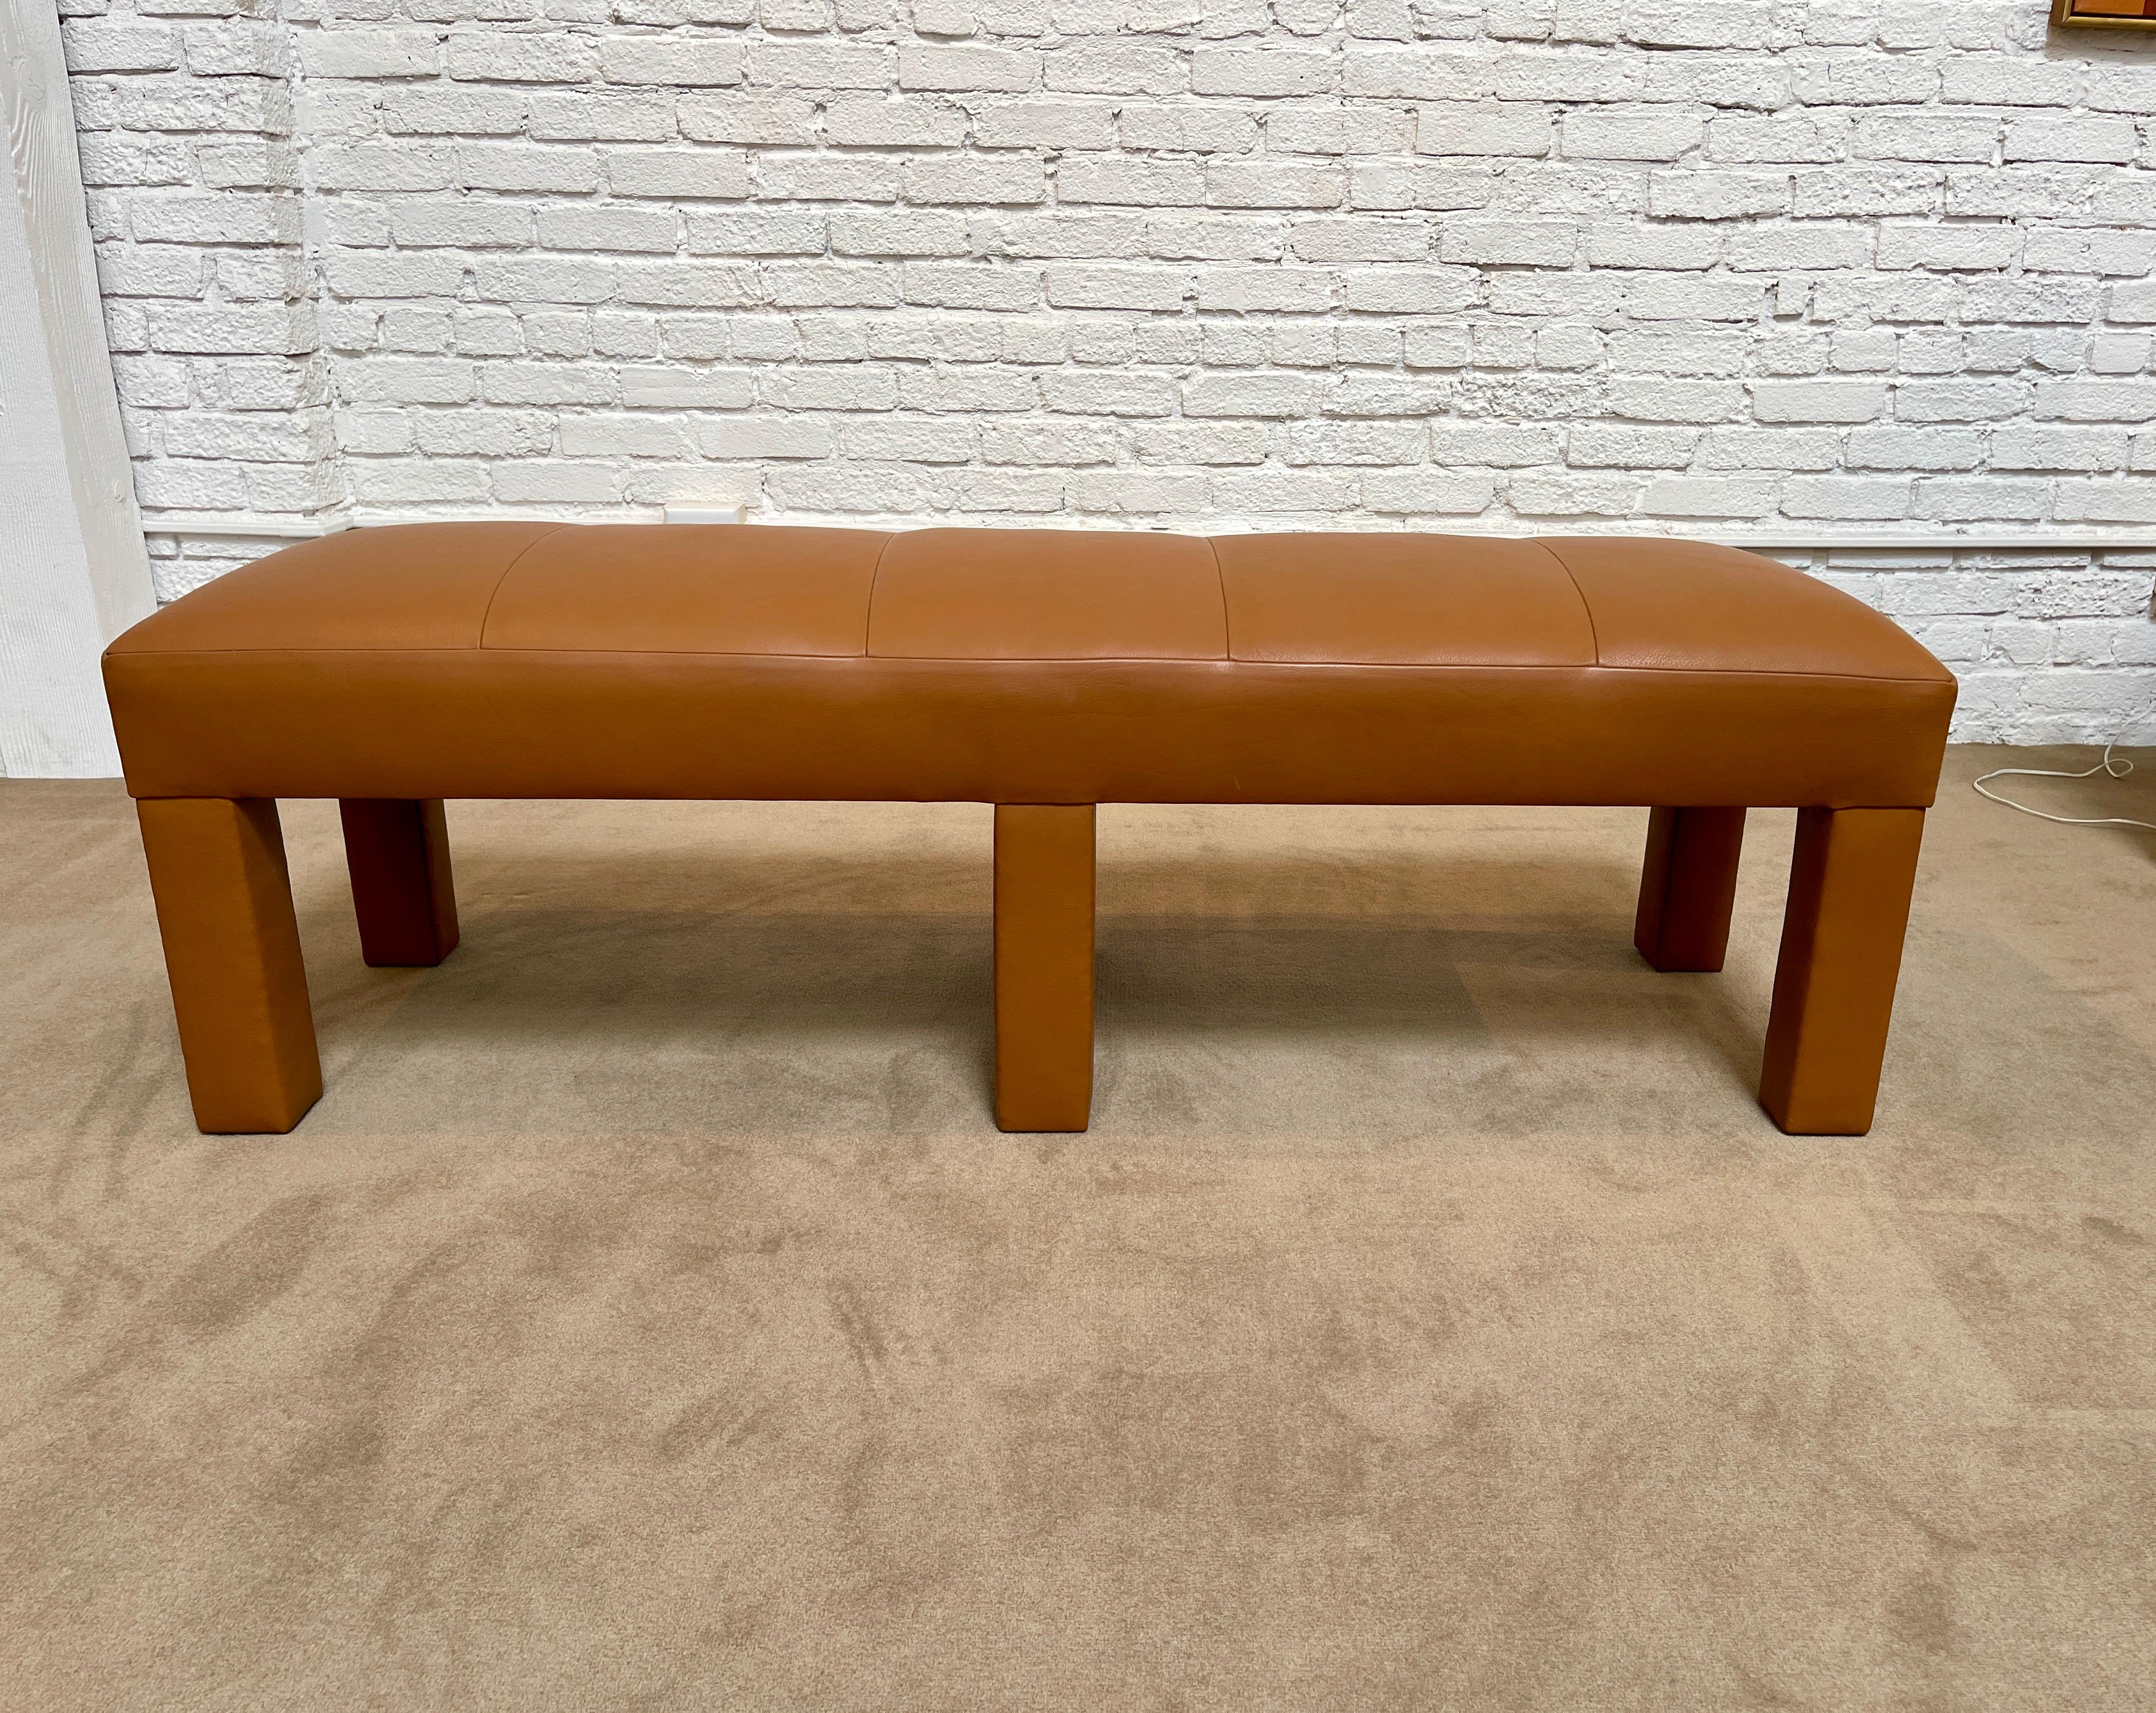 Excellent quality upholstered leather bench. Using the finest craftsmanship, the bench is sturdy and well made. Ready for use. Retains original cloth label - Randolph & Hein. Great for at the foot of a bed. Complementary delivery to the LA area.